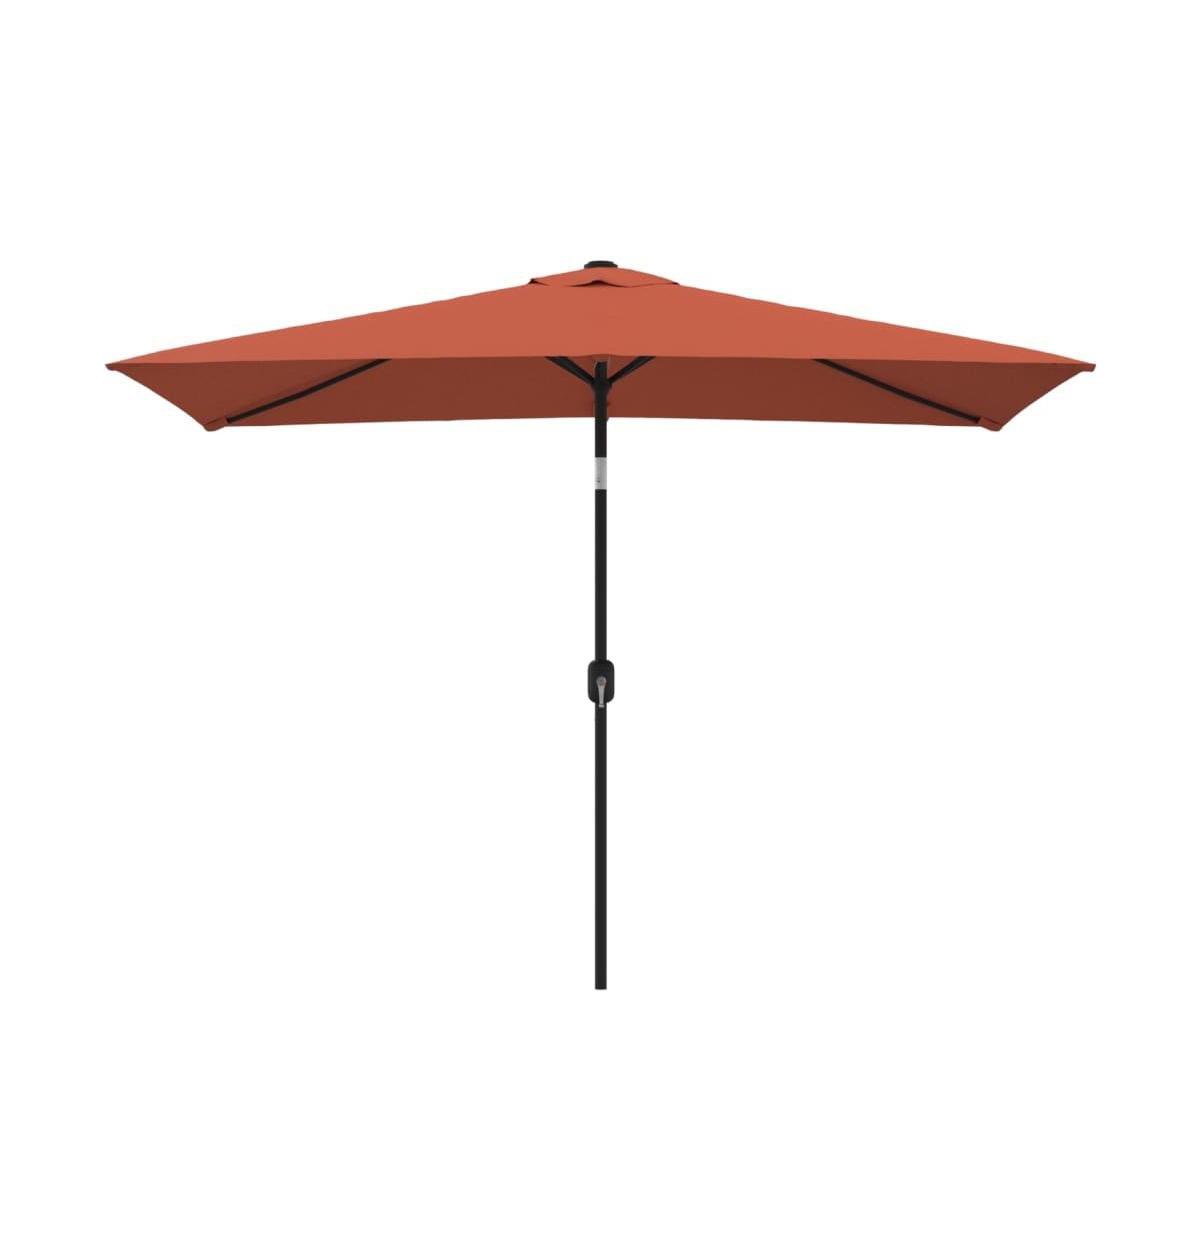 Outdoor Parasol with Metal Pole 118"x78.7" Terracotta - Brown